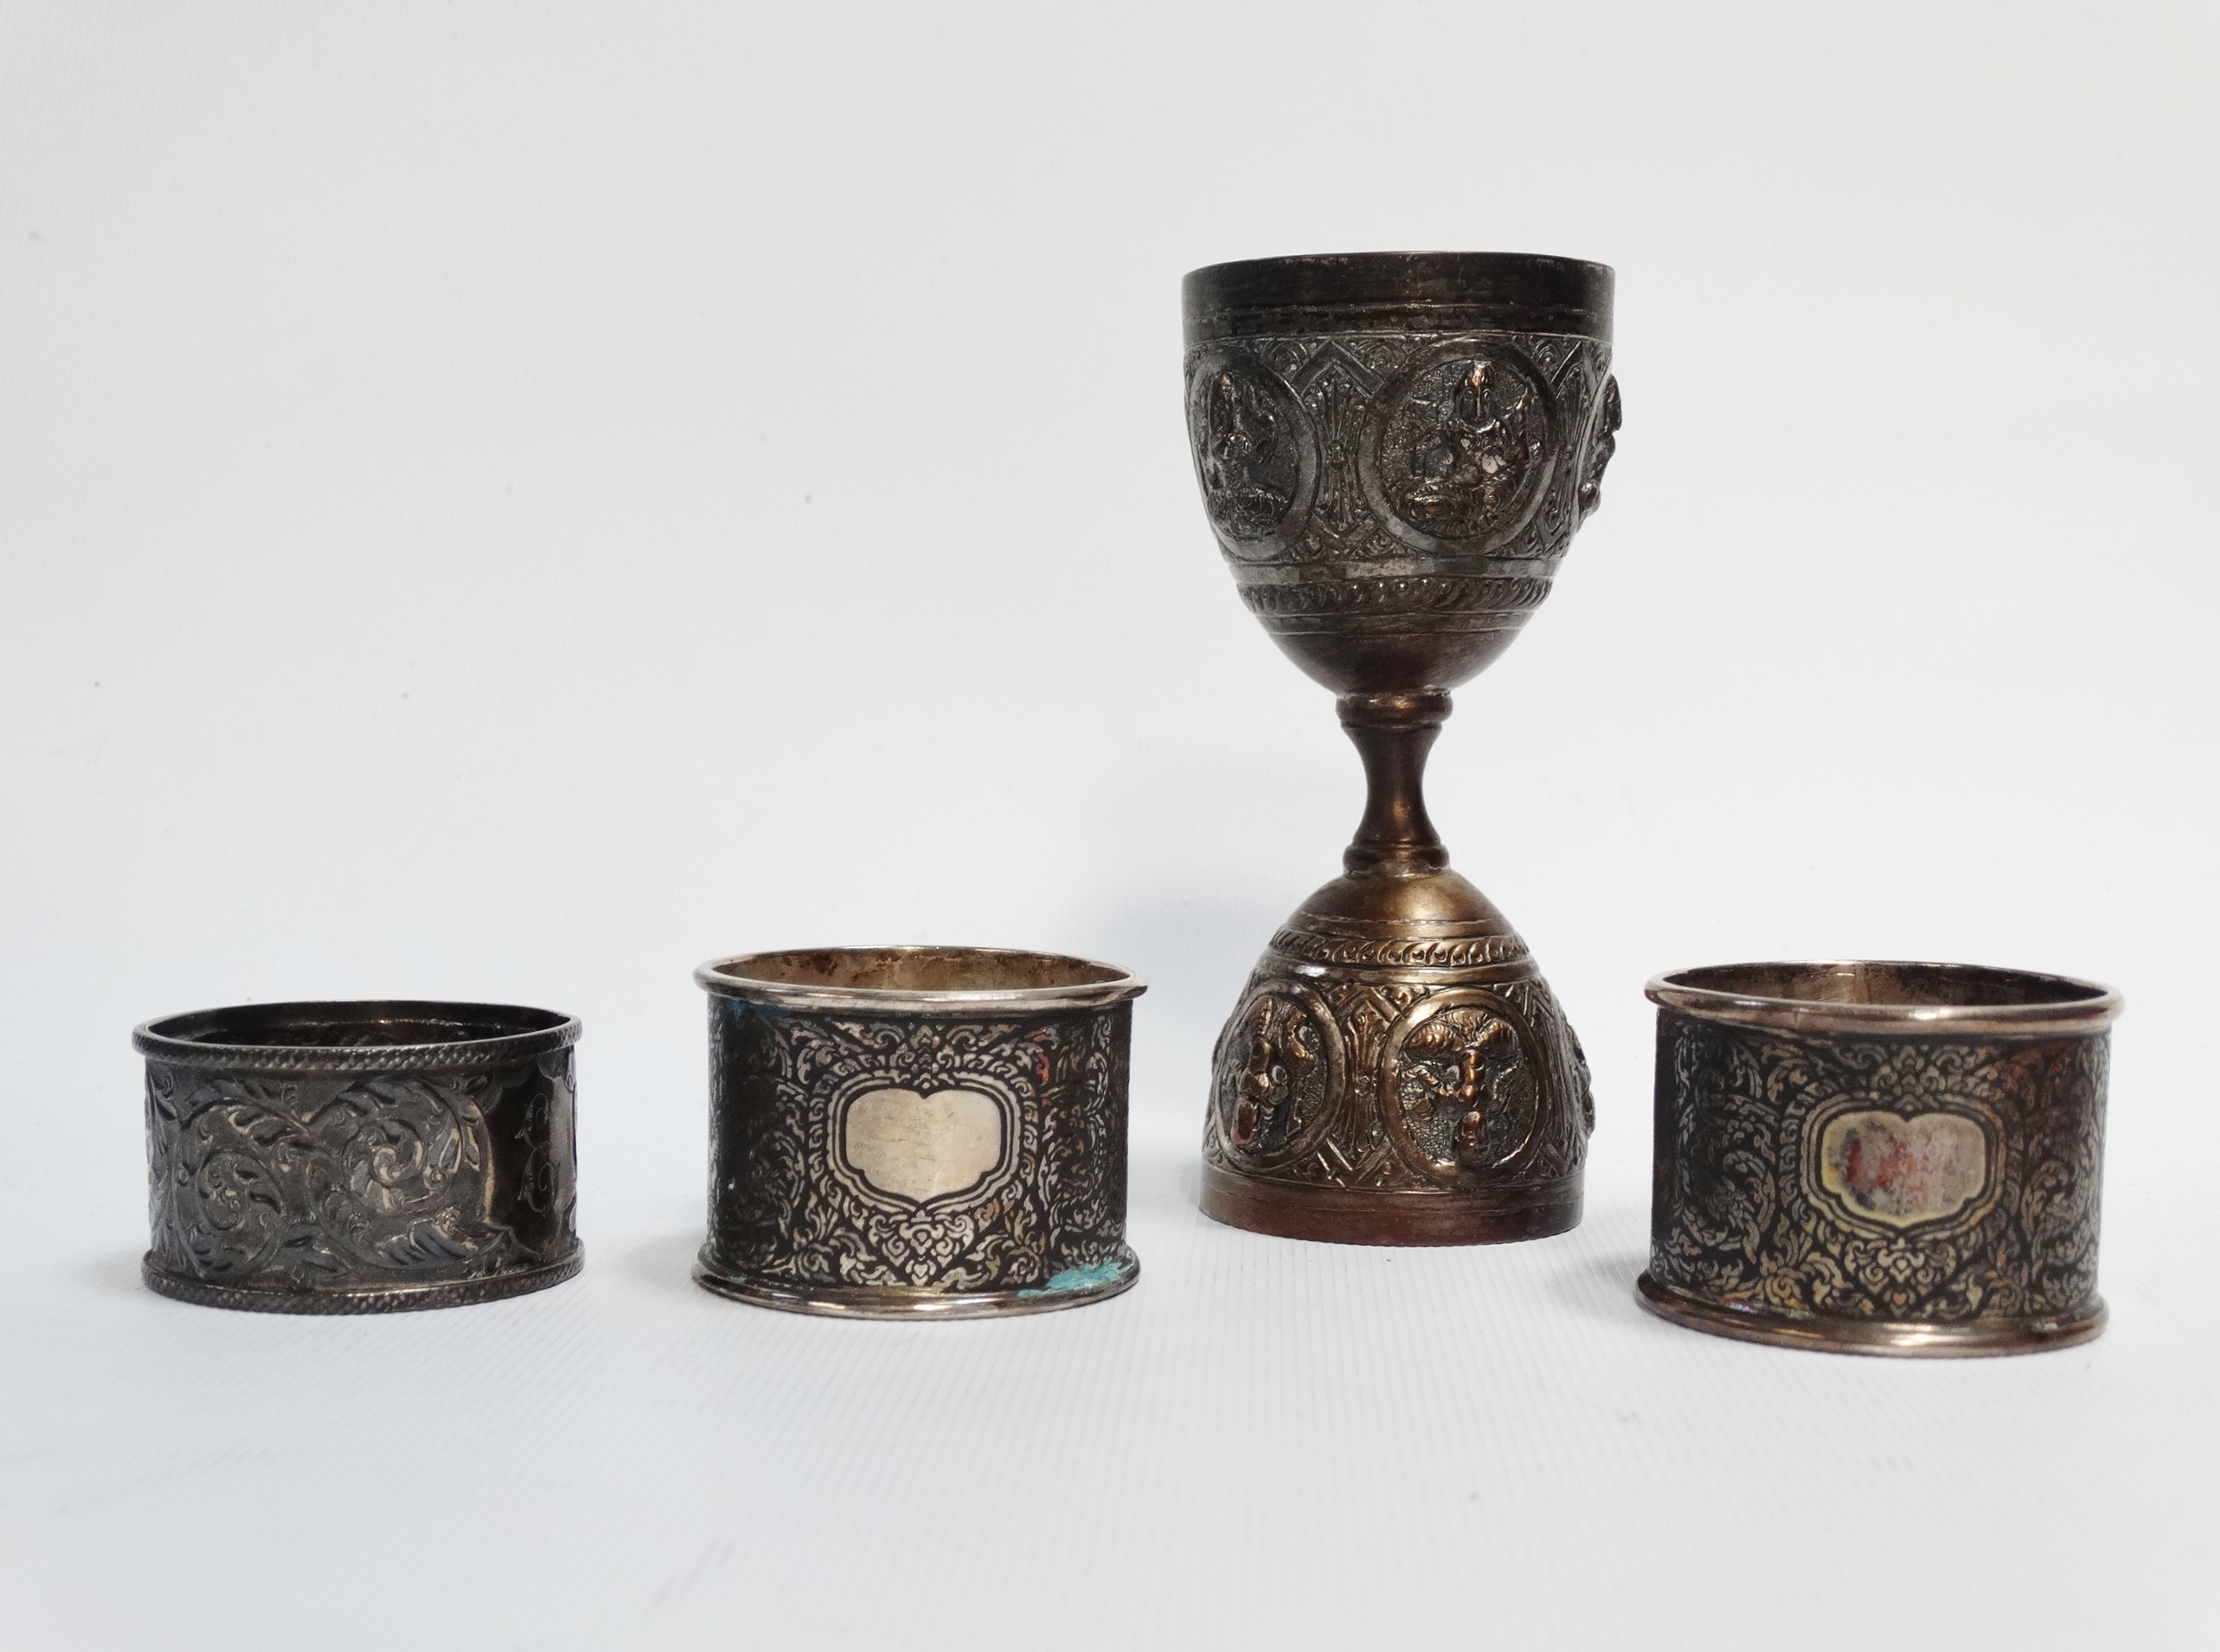 An Indian silver double egg cup - Repousse decorated with deities, 10cm (high), together with a pair